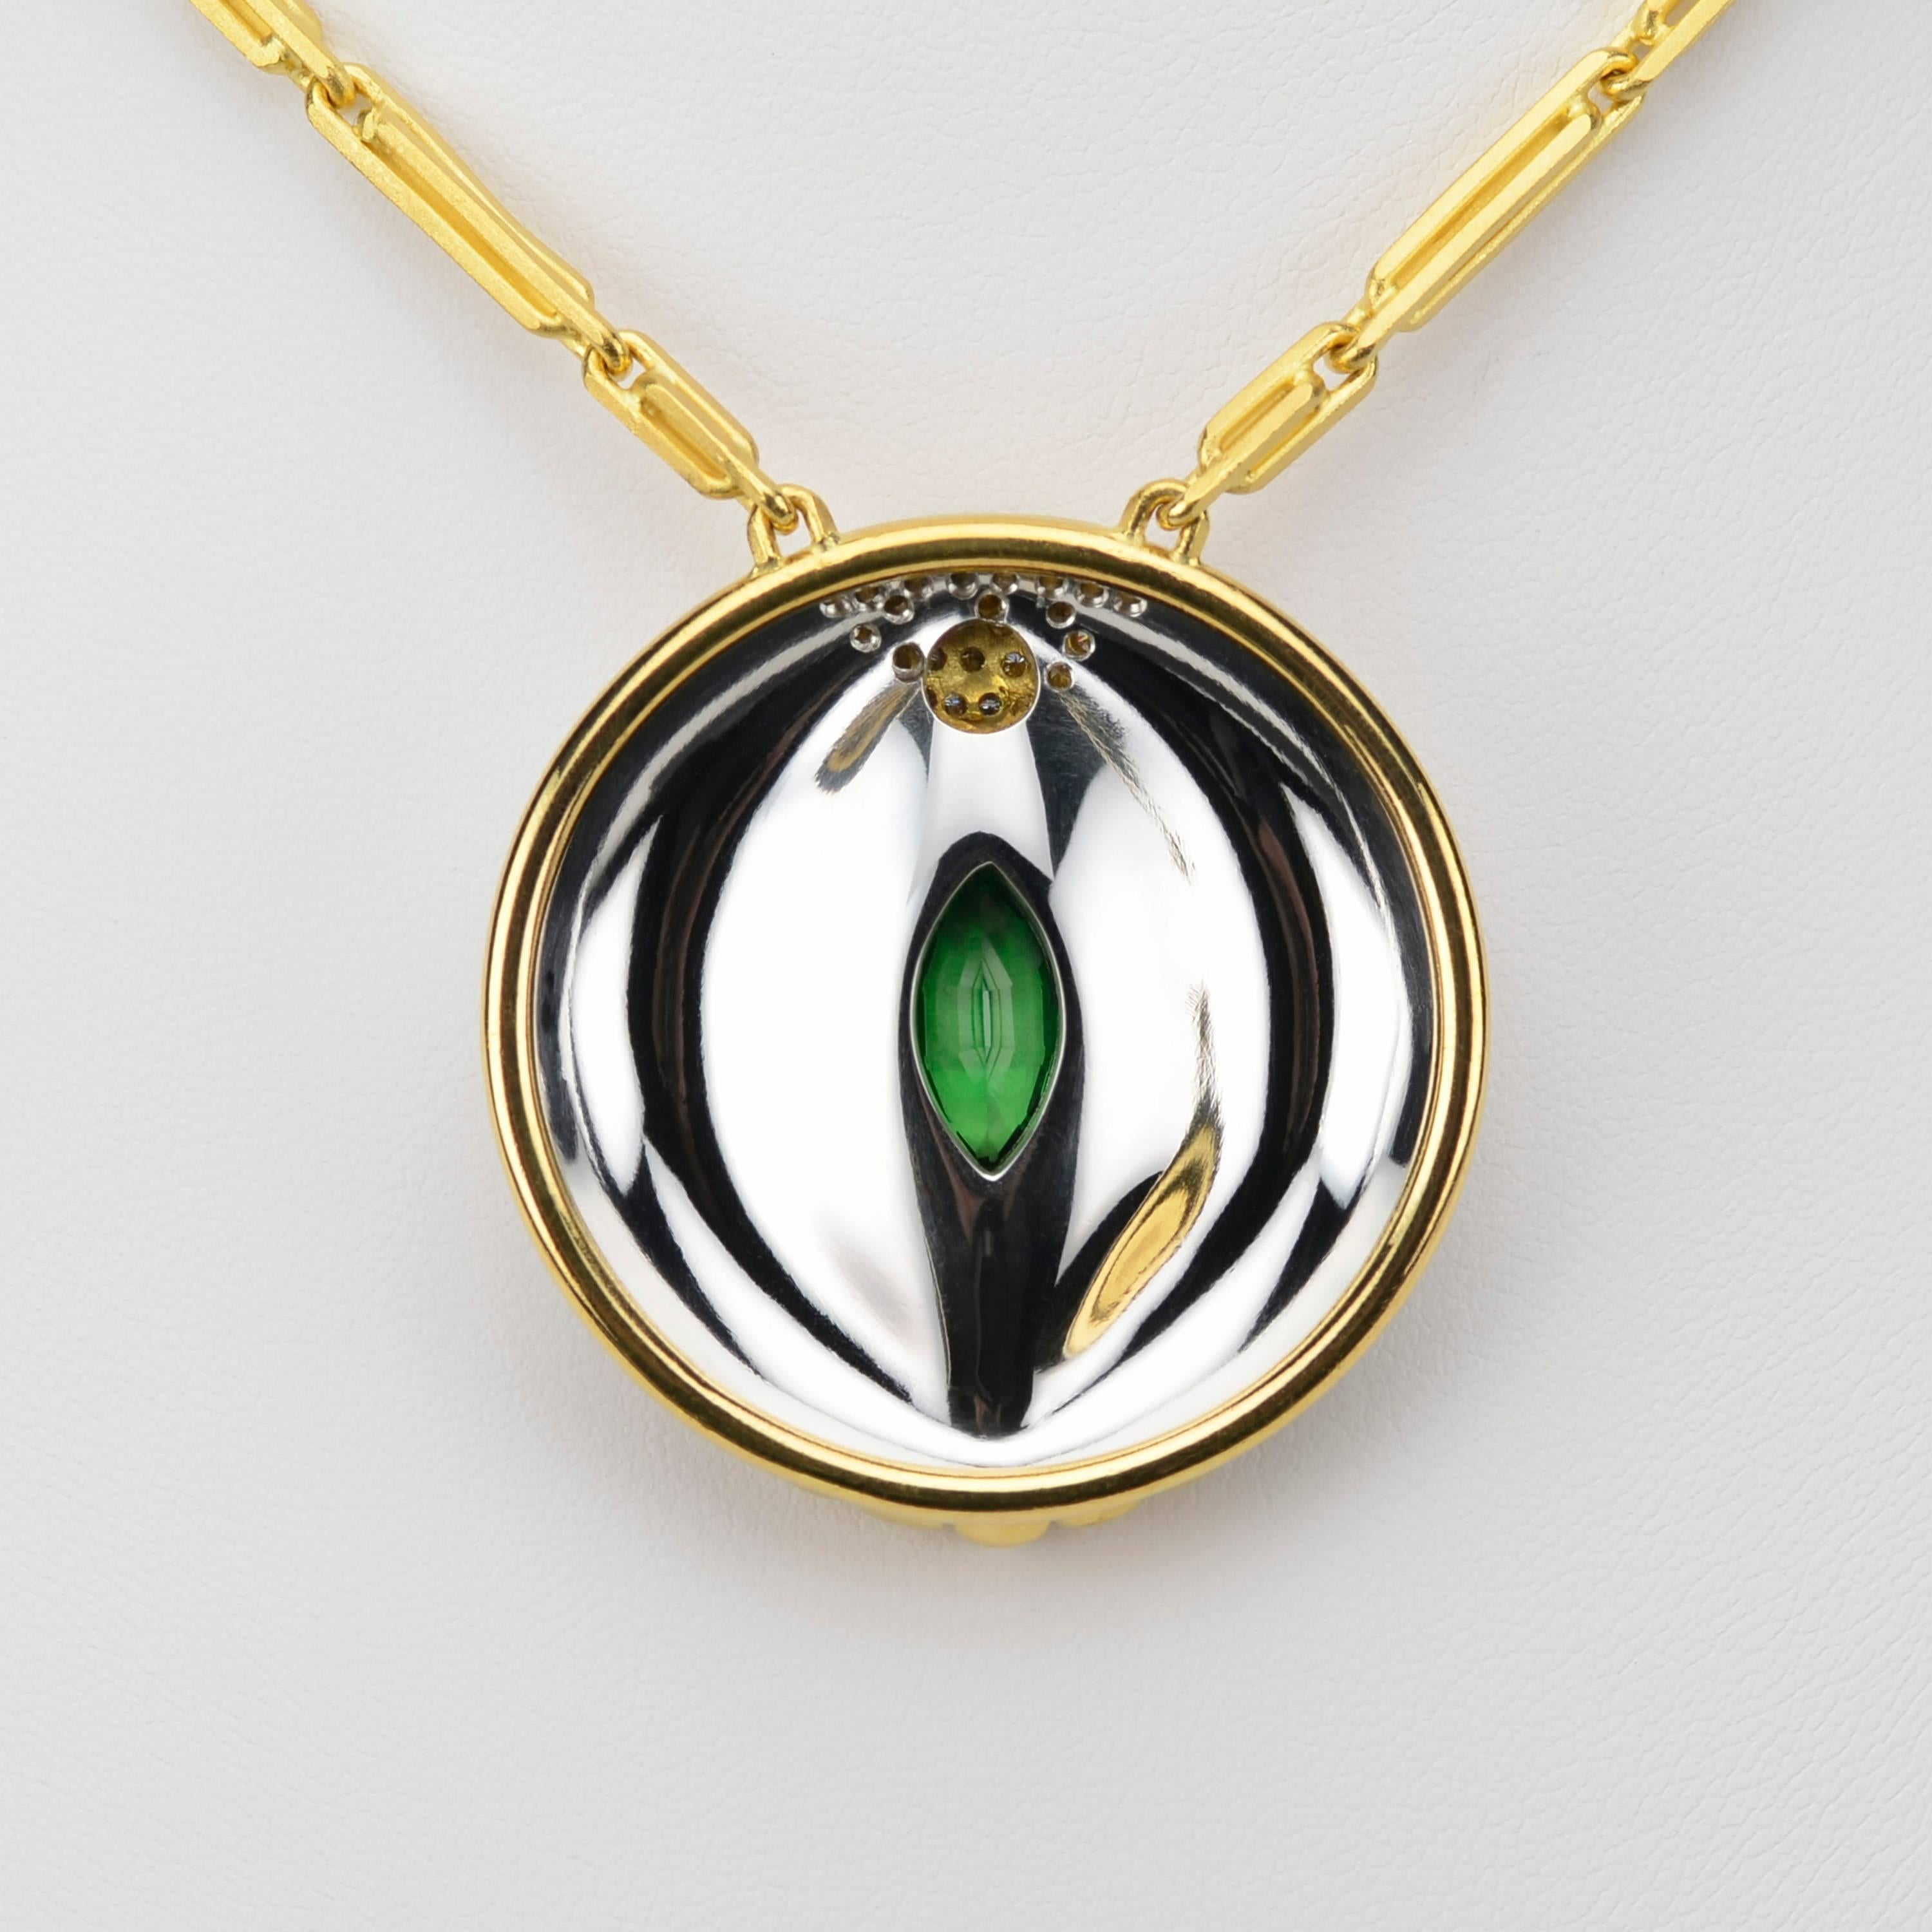 An exceptional entirely hand built choker style pendant reflecting the clean lines of late Modernism.
This striking vintage piece was created by Henn in the Nineties using solid gold inlaid into platinum with an exceptional 2.00ct Kenyan tsavorite